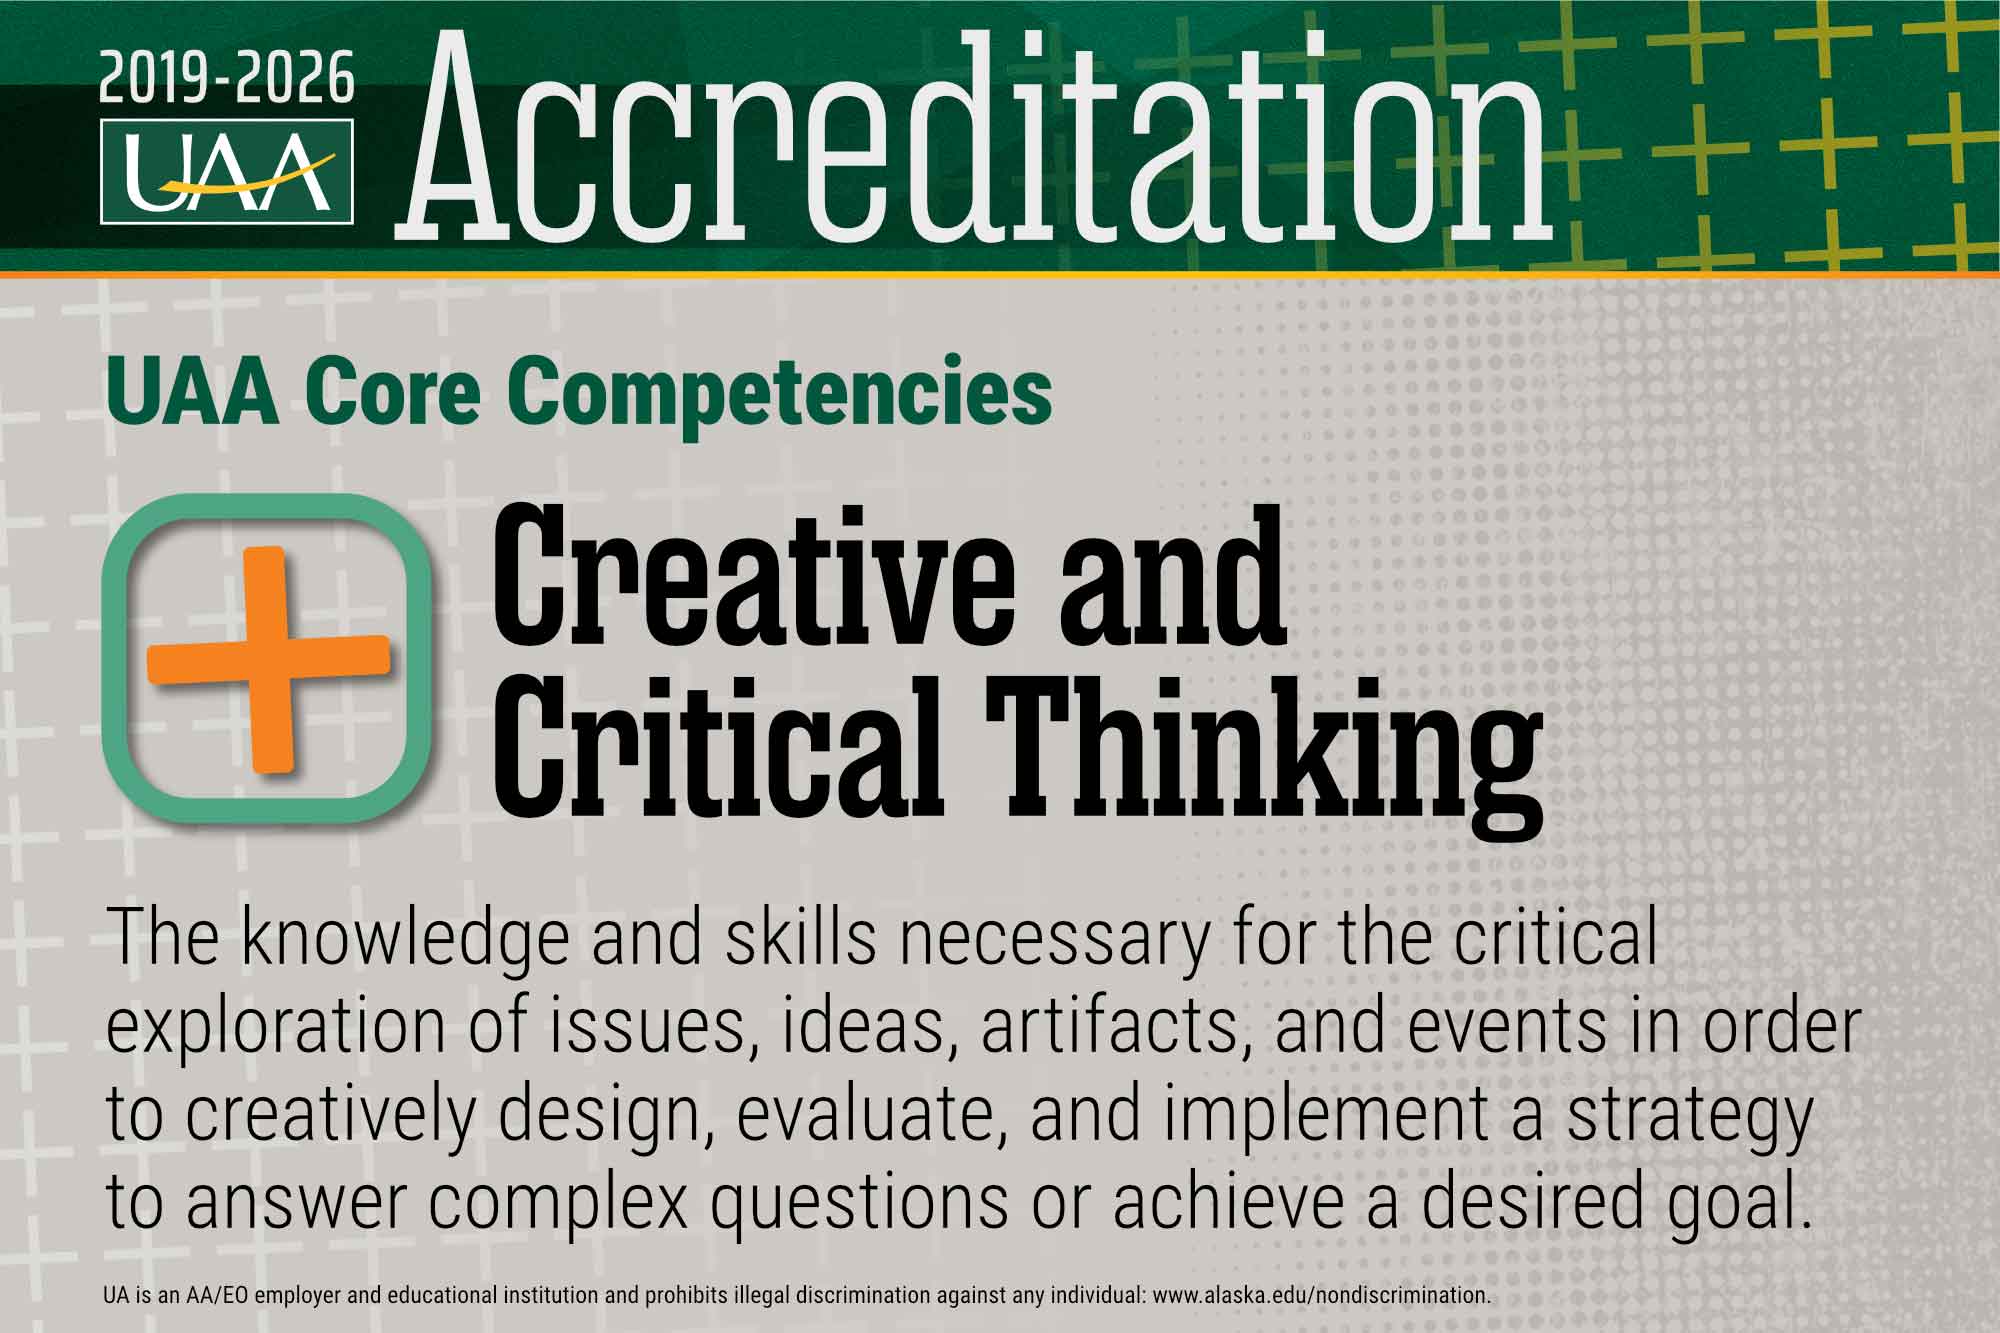 Core competency 2: Creative and critical thinking. 